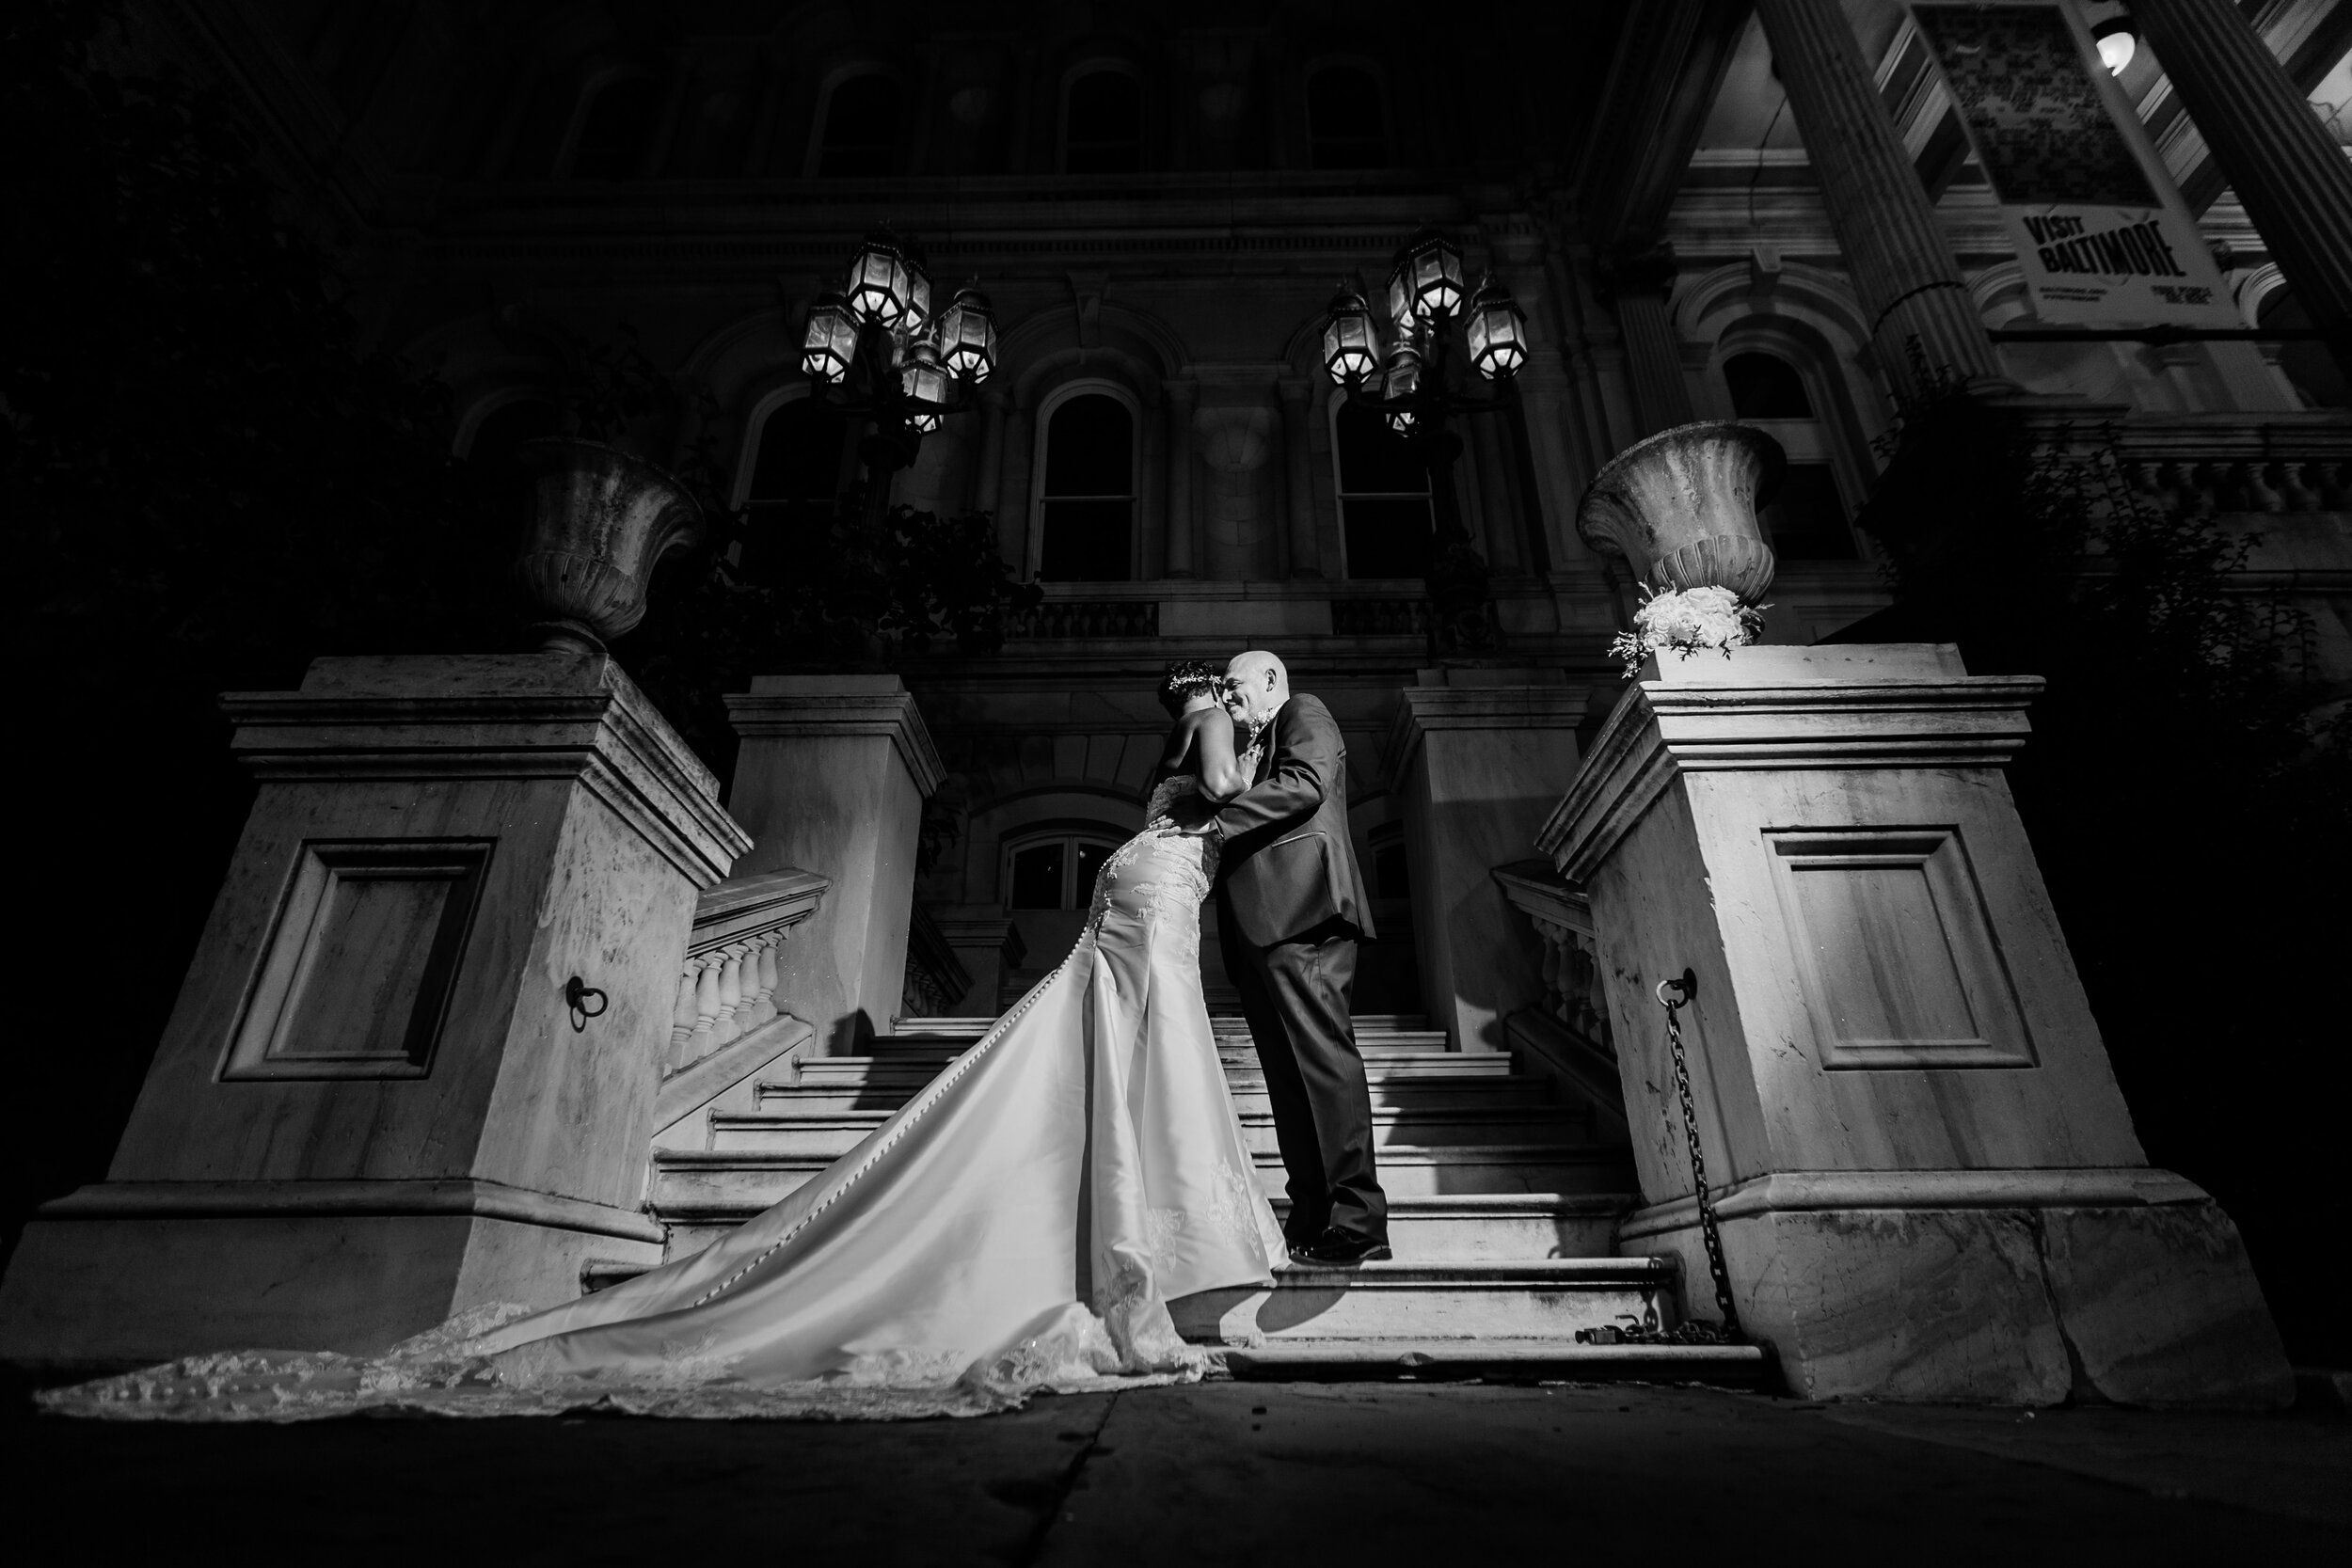 get married in baltimore city hall shot by megapixels media biracial couple wedding photographers maryland-91.jpg